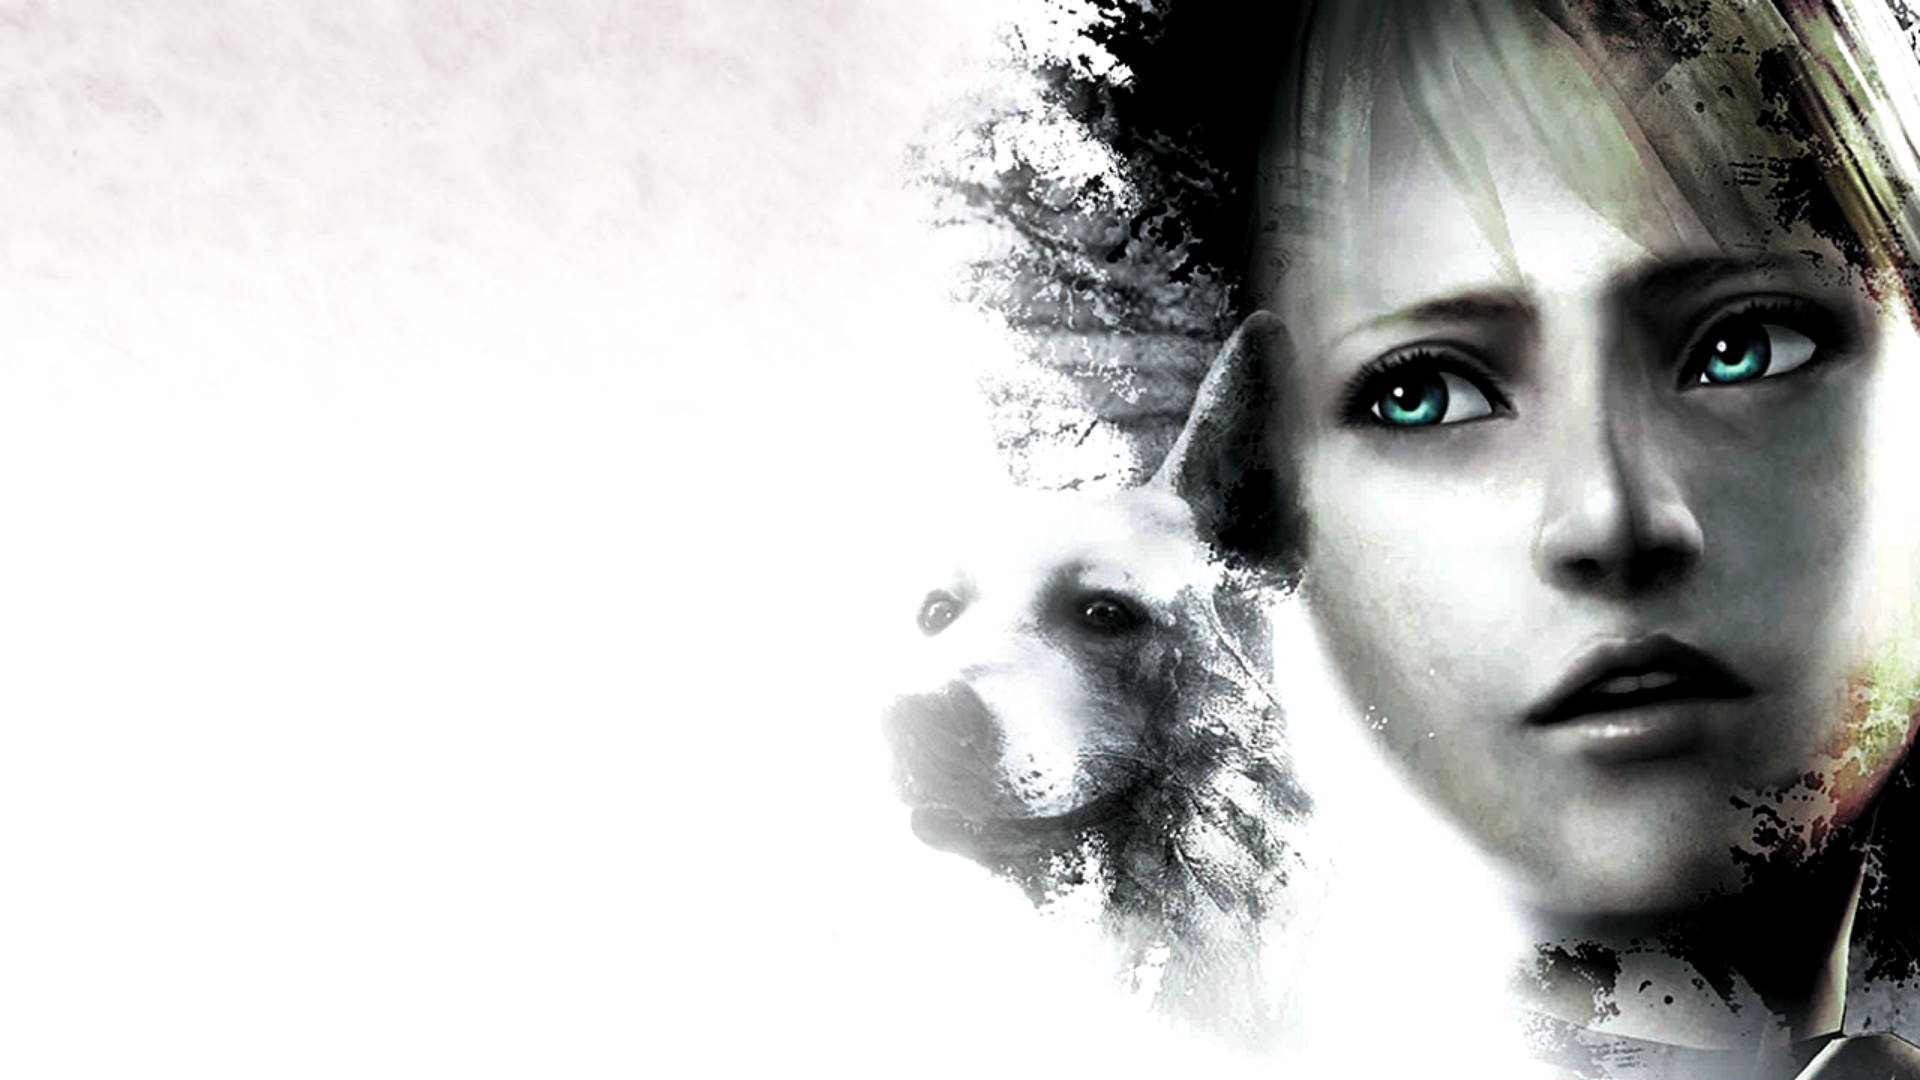 Haunting Ground Capcom Horror Video Game Characters Video Game Art Video Game Girls 1920x1080